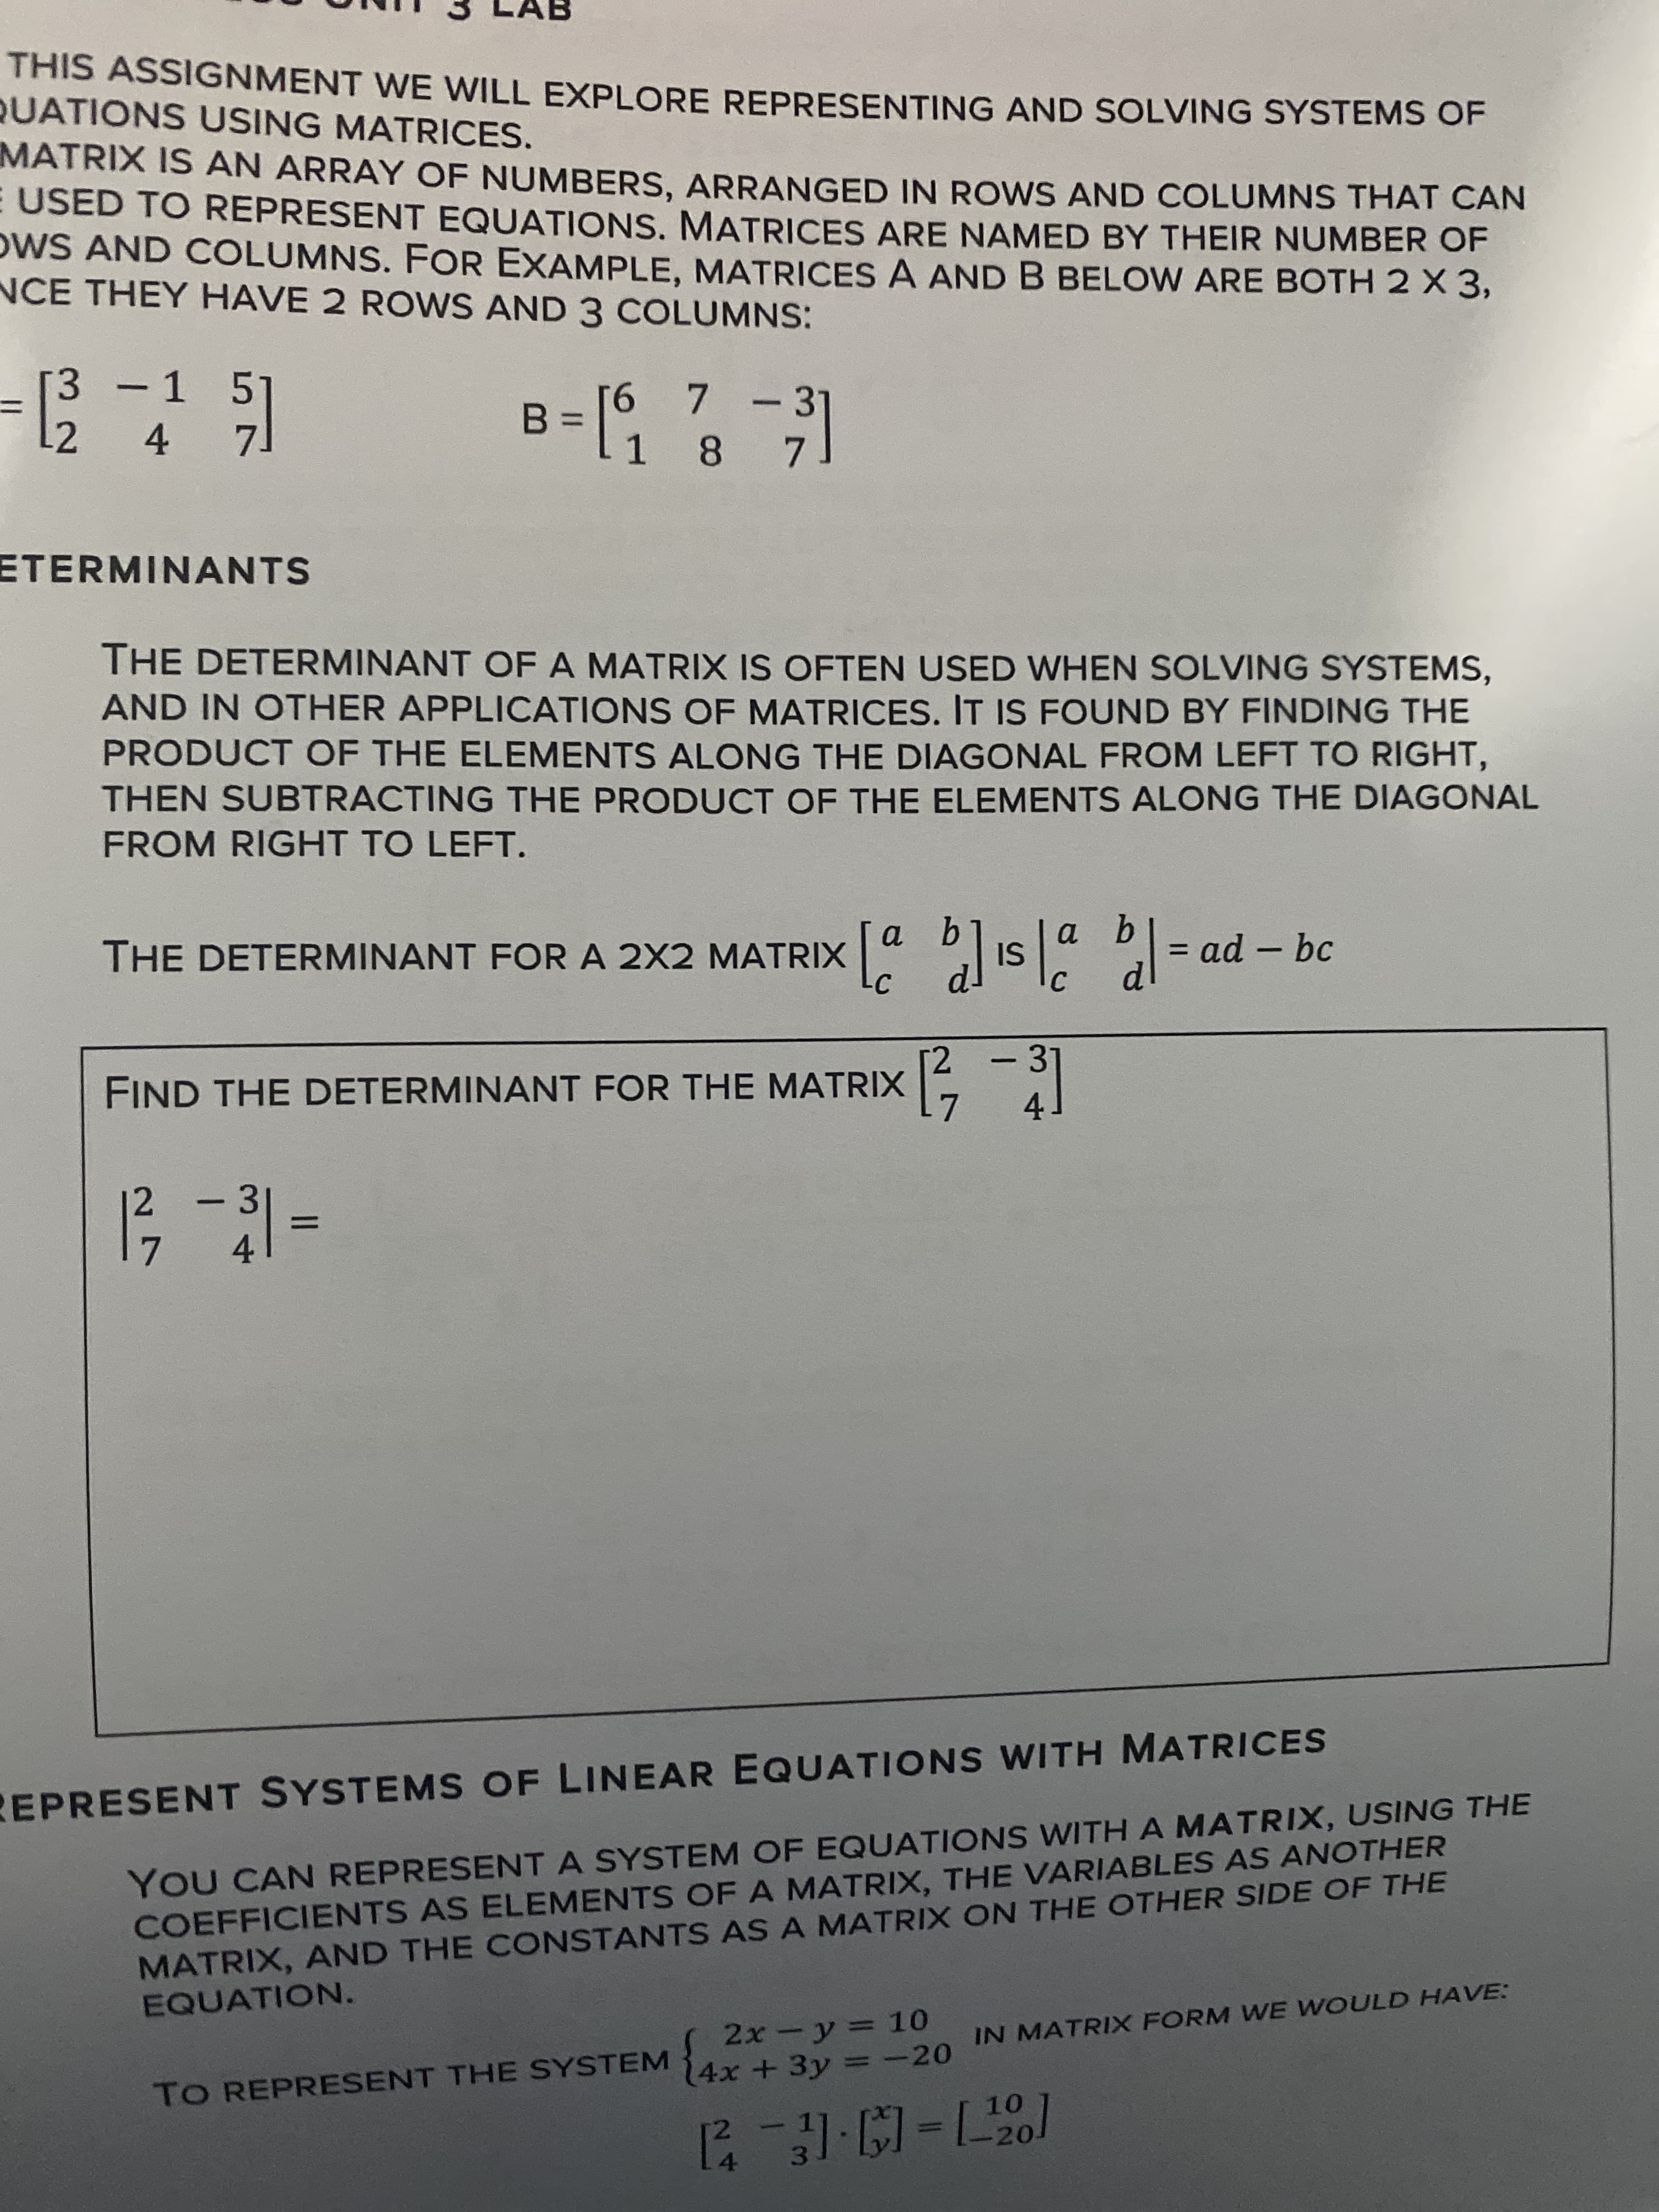 FIND THE DETERMINANT FOR THE MATRIX
- 3
%3D
7
